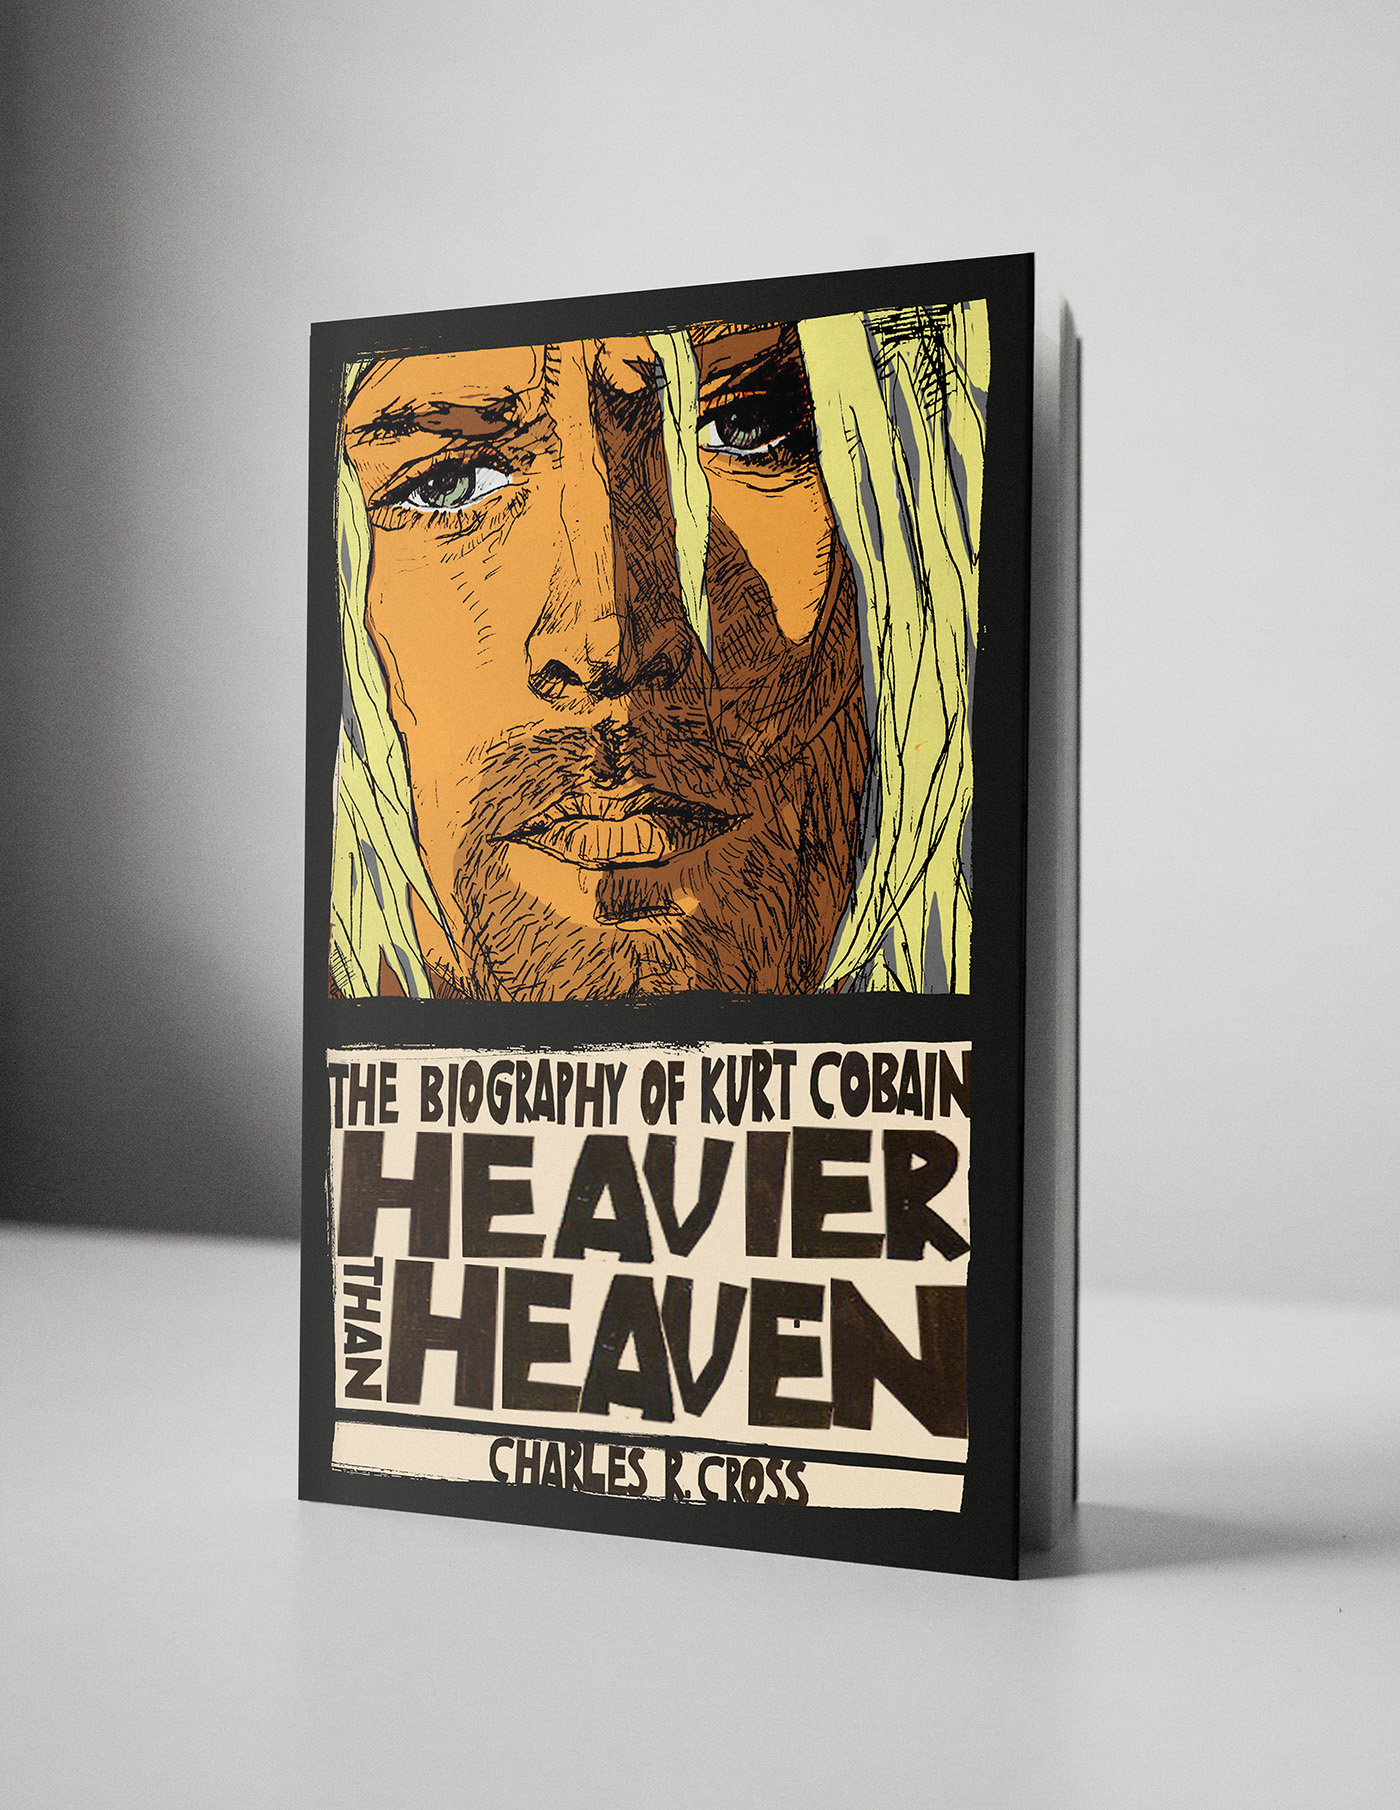 Alternative book cover concepts for Kurt Cobain's biography 'Heavier Than Heaven', by Shann Larsson 